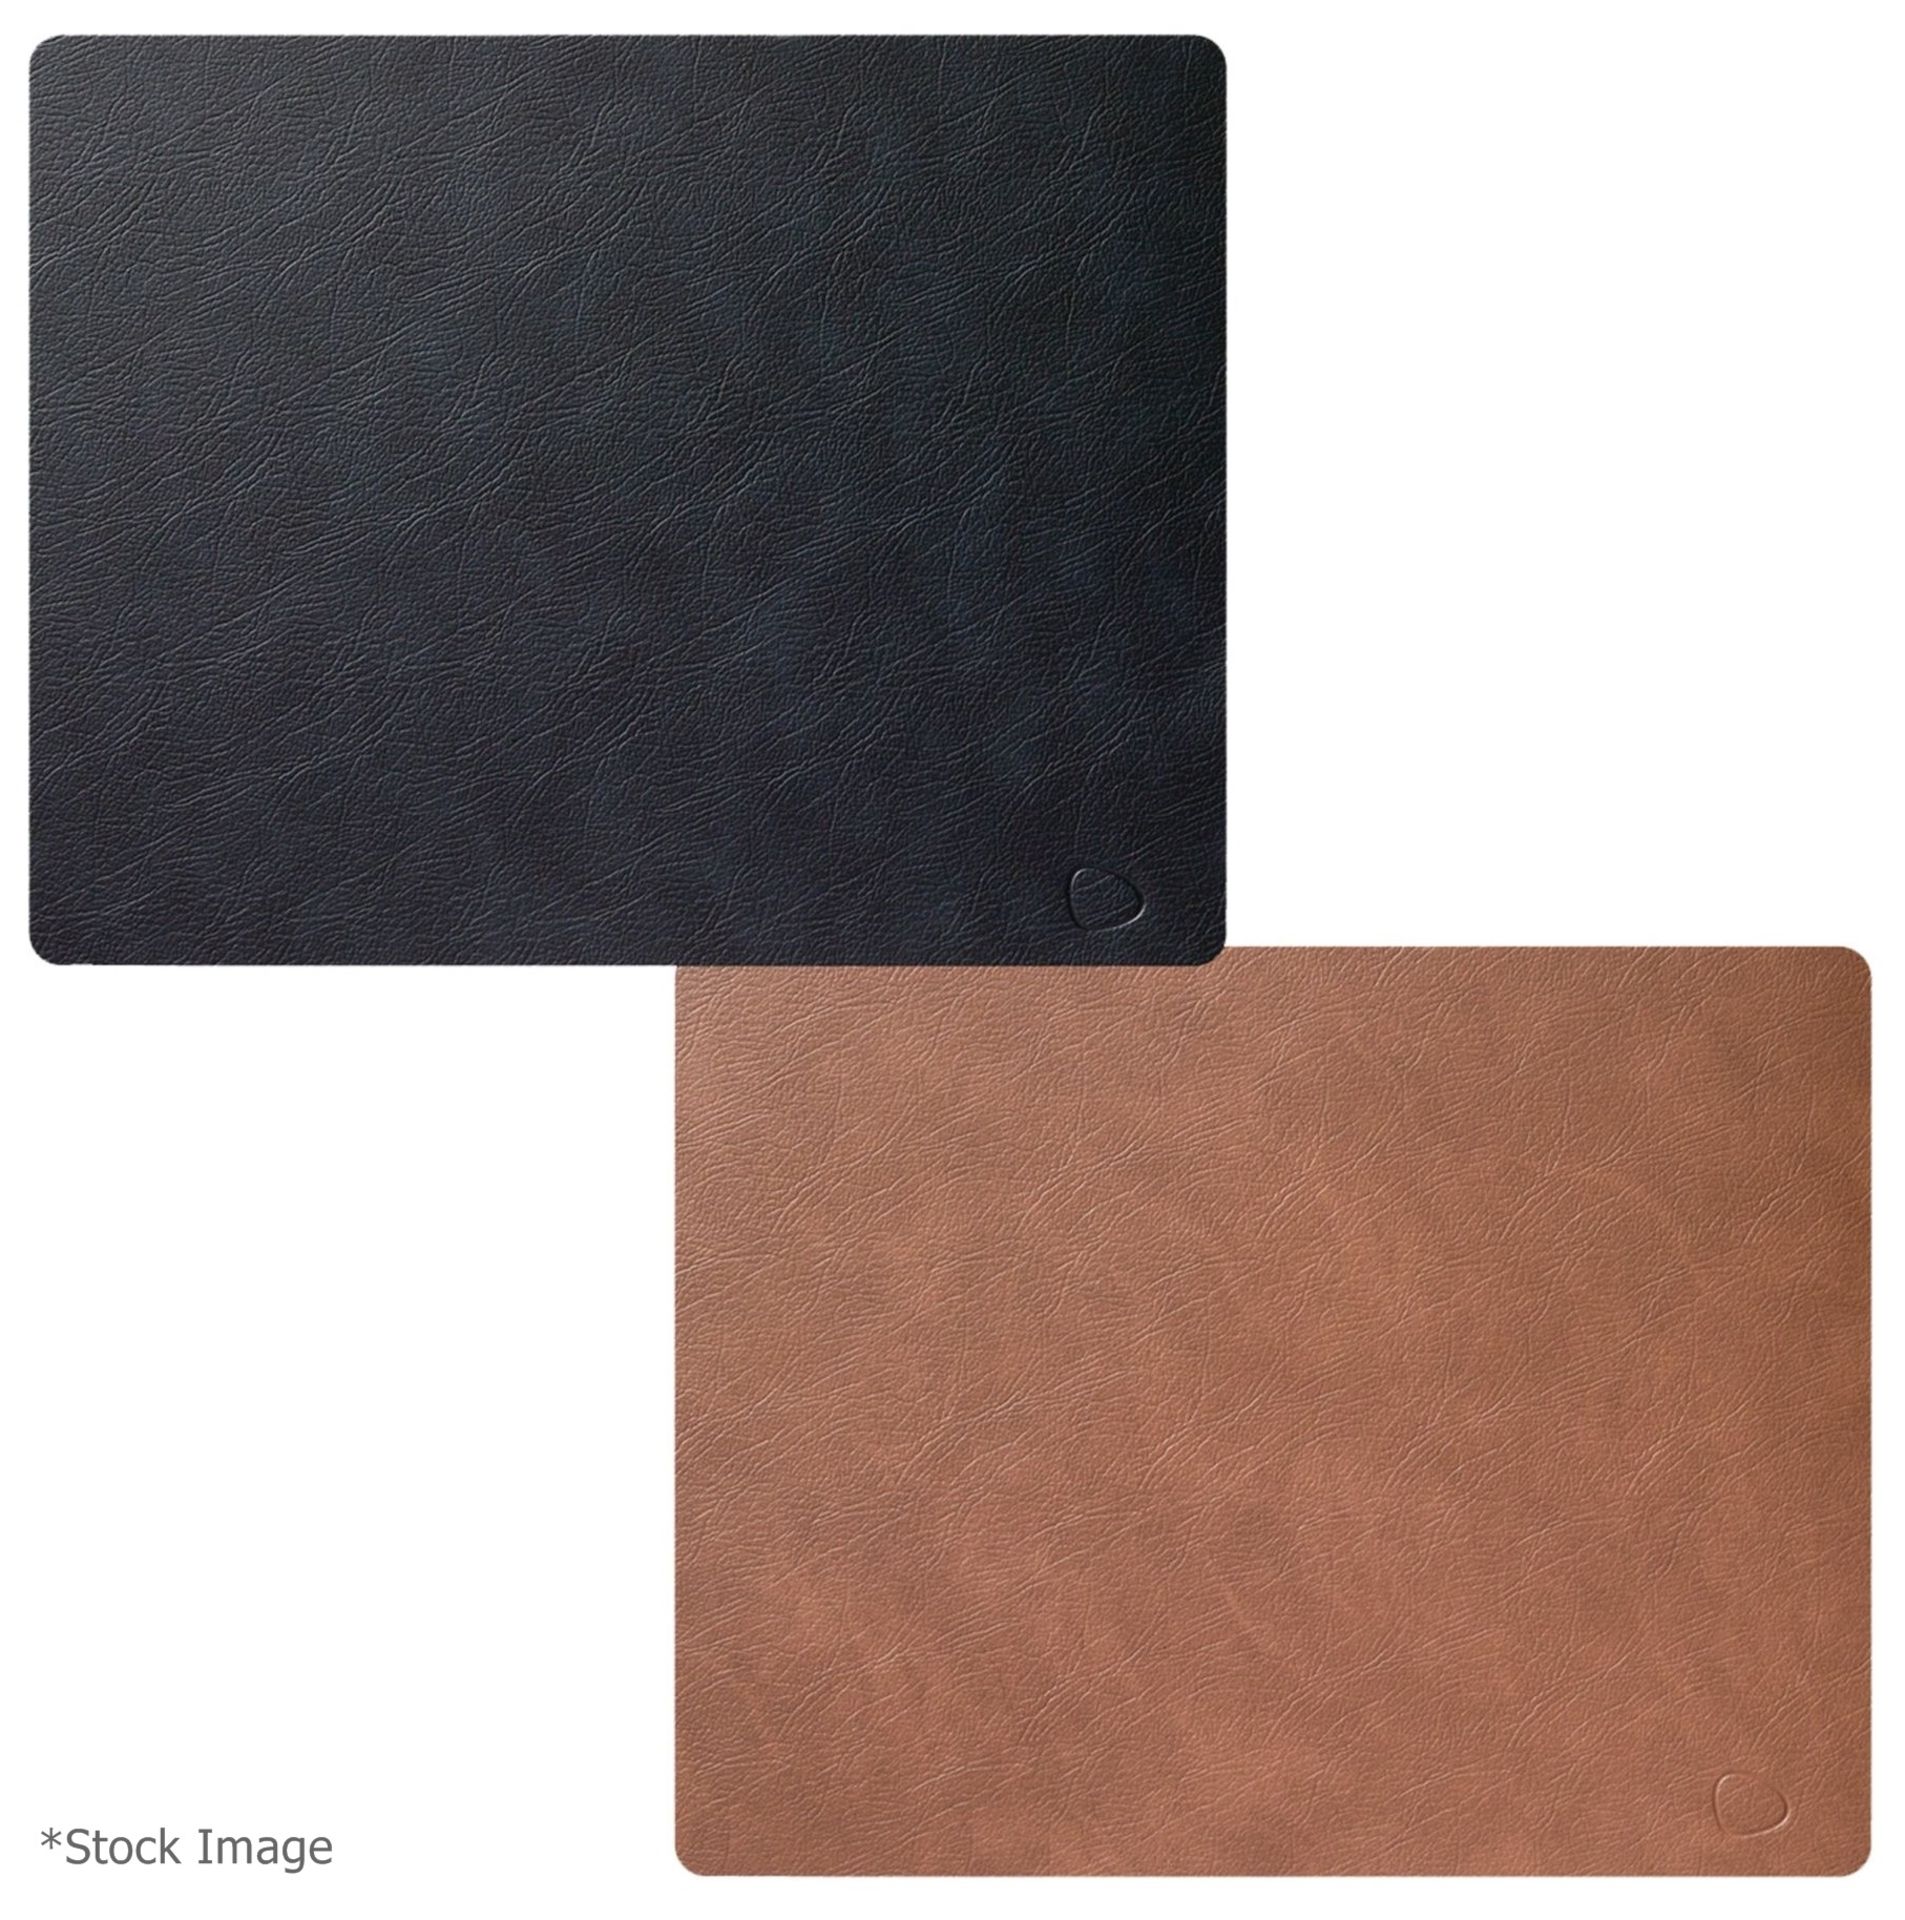 Set Of 4 x LINDDNA 'CLOUD' Recycled Leather Double-sided Placemats In Black & Brown - RRP £109.00 - Image 3 of 9